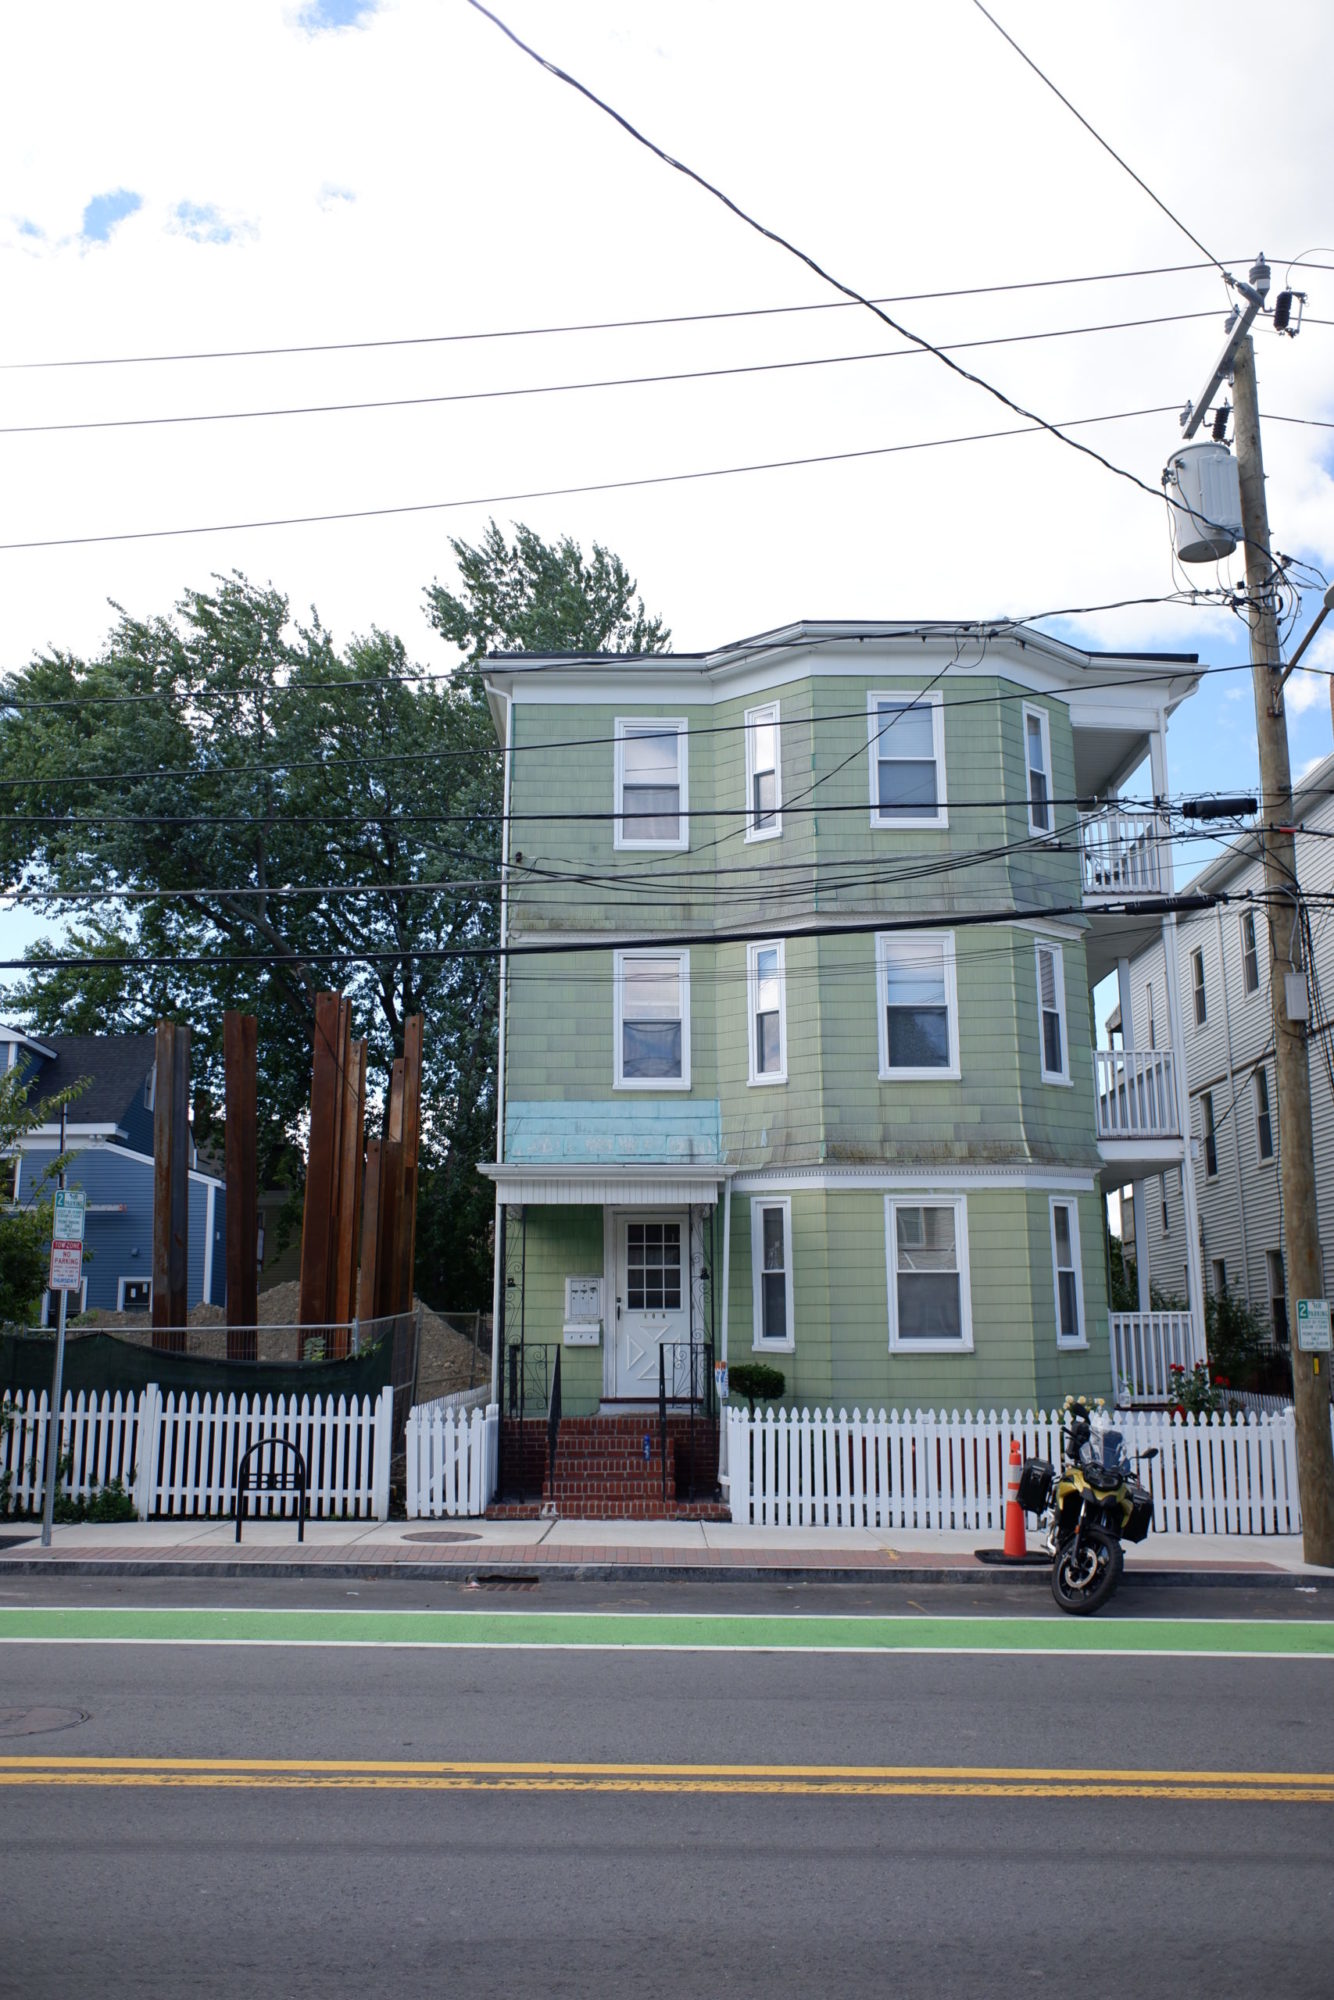 A straight on, street view image of a three story muted green house. The front door is on the front left of the building under an awning. The paint directly above the awning is much more blue than the rest of the building. There is a bay window on the front left side of all three floors. There are also covered porches on all three floors on the right side of the building. There is a white fence around the yard and a motorcycle and traffic cone on the side walk. Telephone wires cross in front of the house.